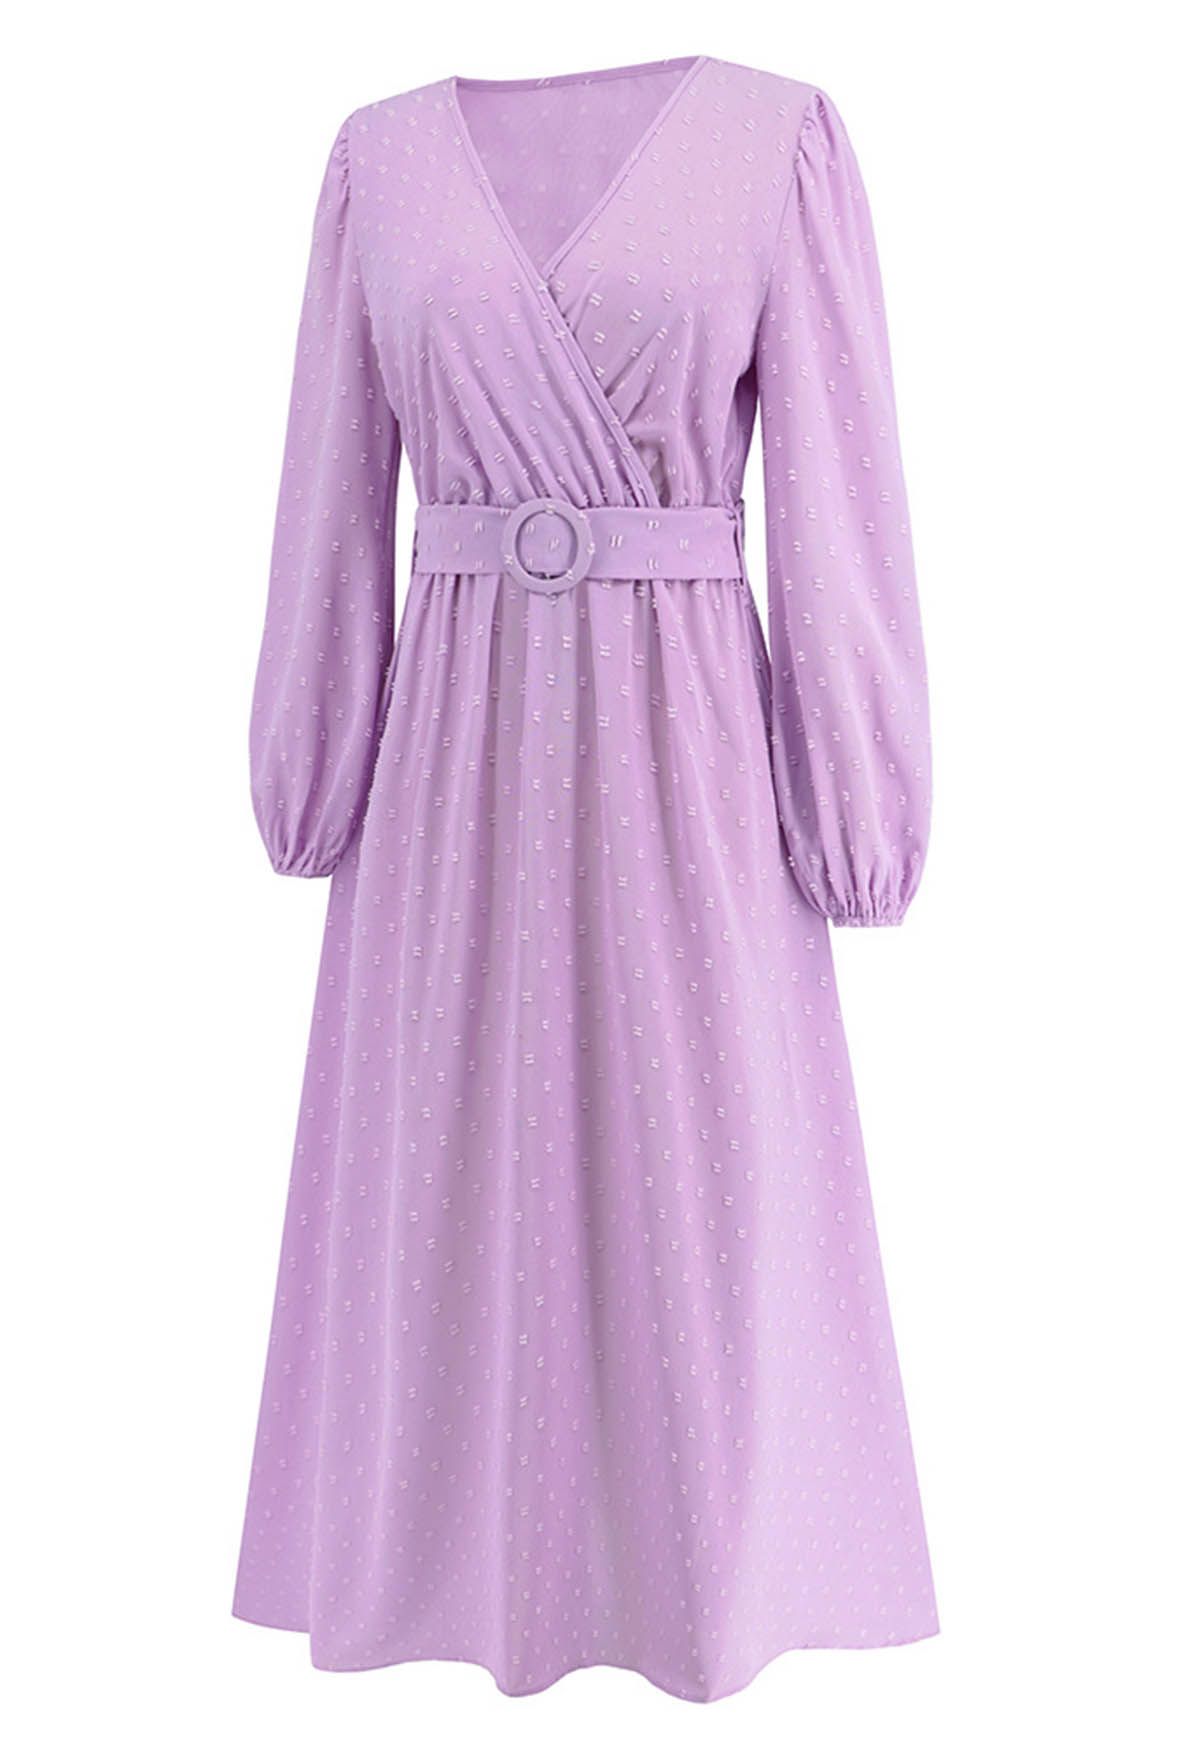 Flock Dot Jacquard Faux-Wrap Belted Dress in Lilac - Retro, Indie and ...